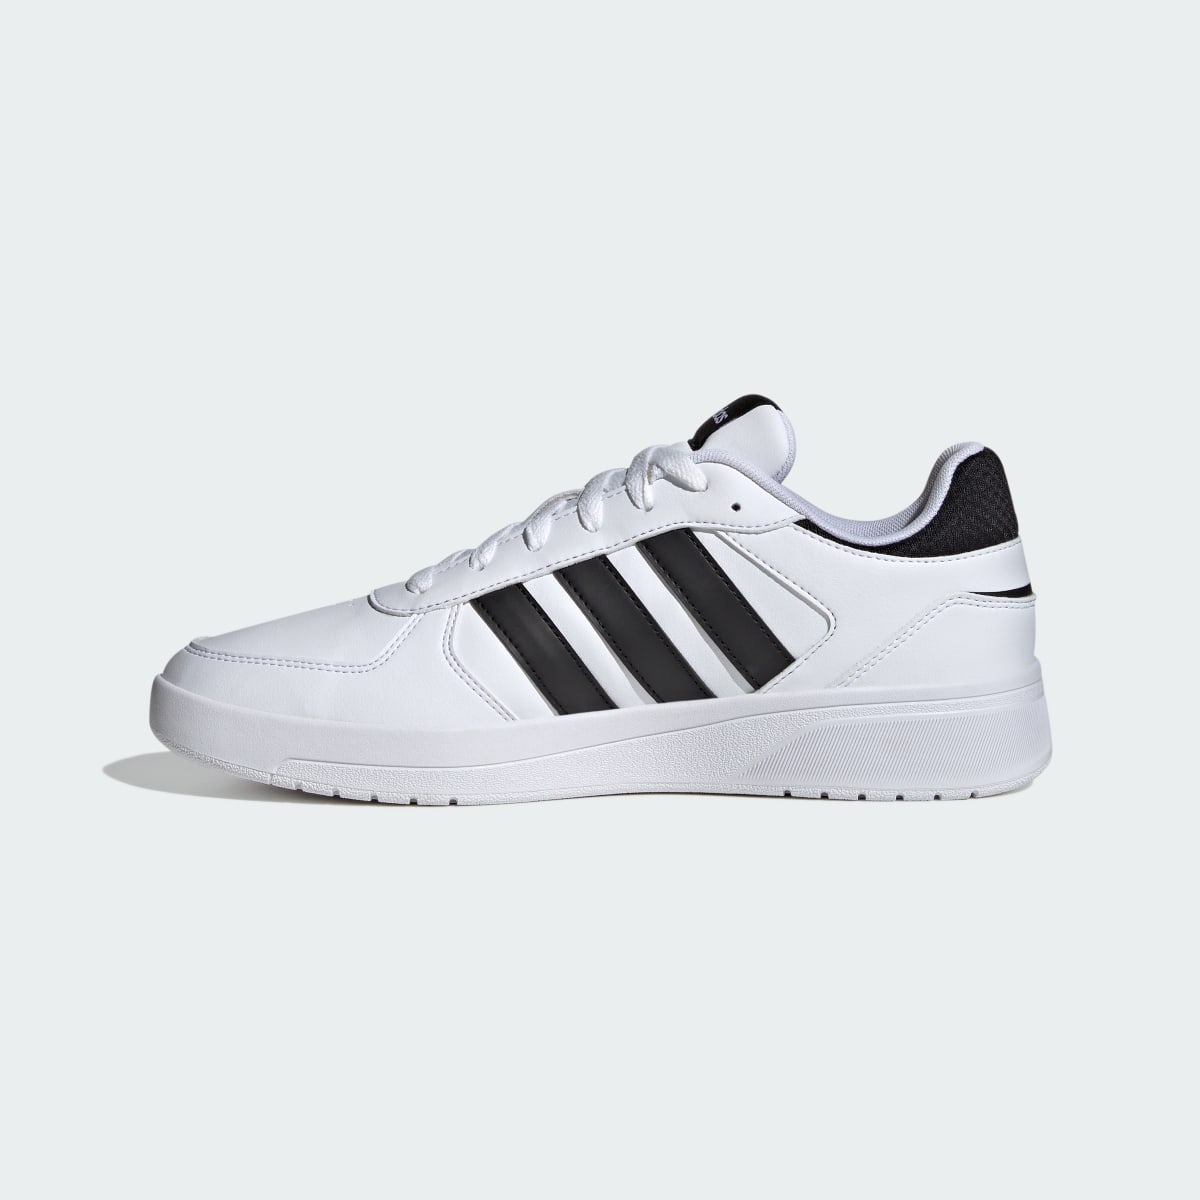 Adidas Chaussure CourtBeat Court Lifestyle. 7